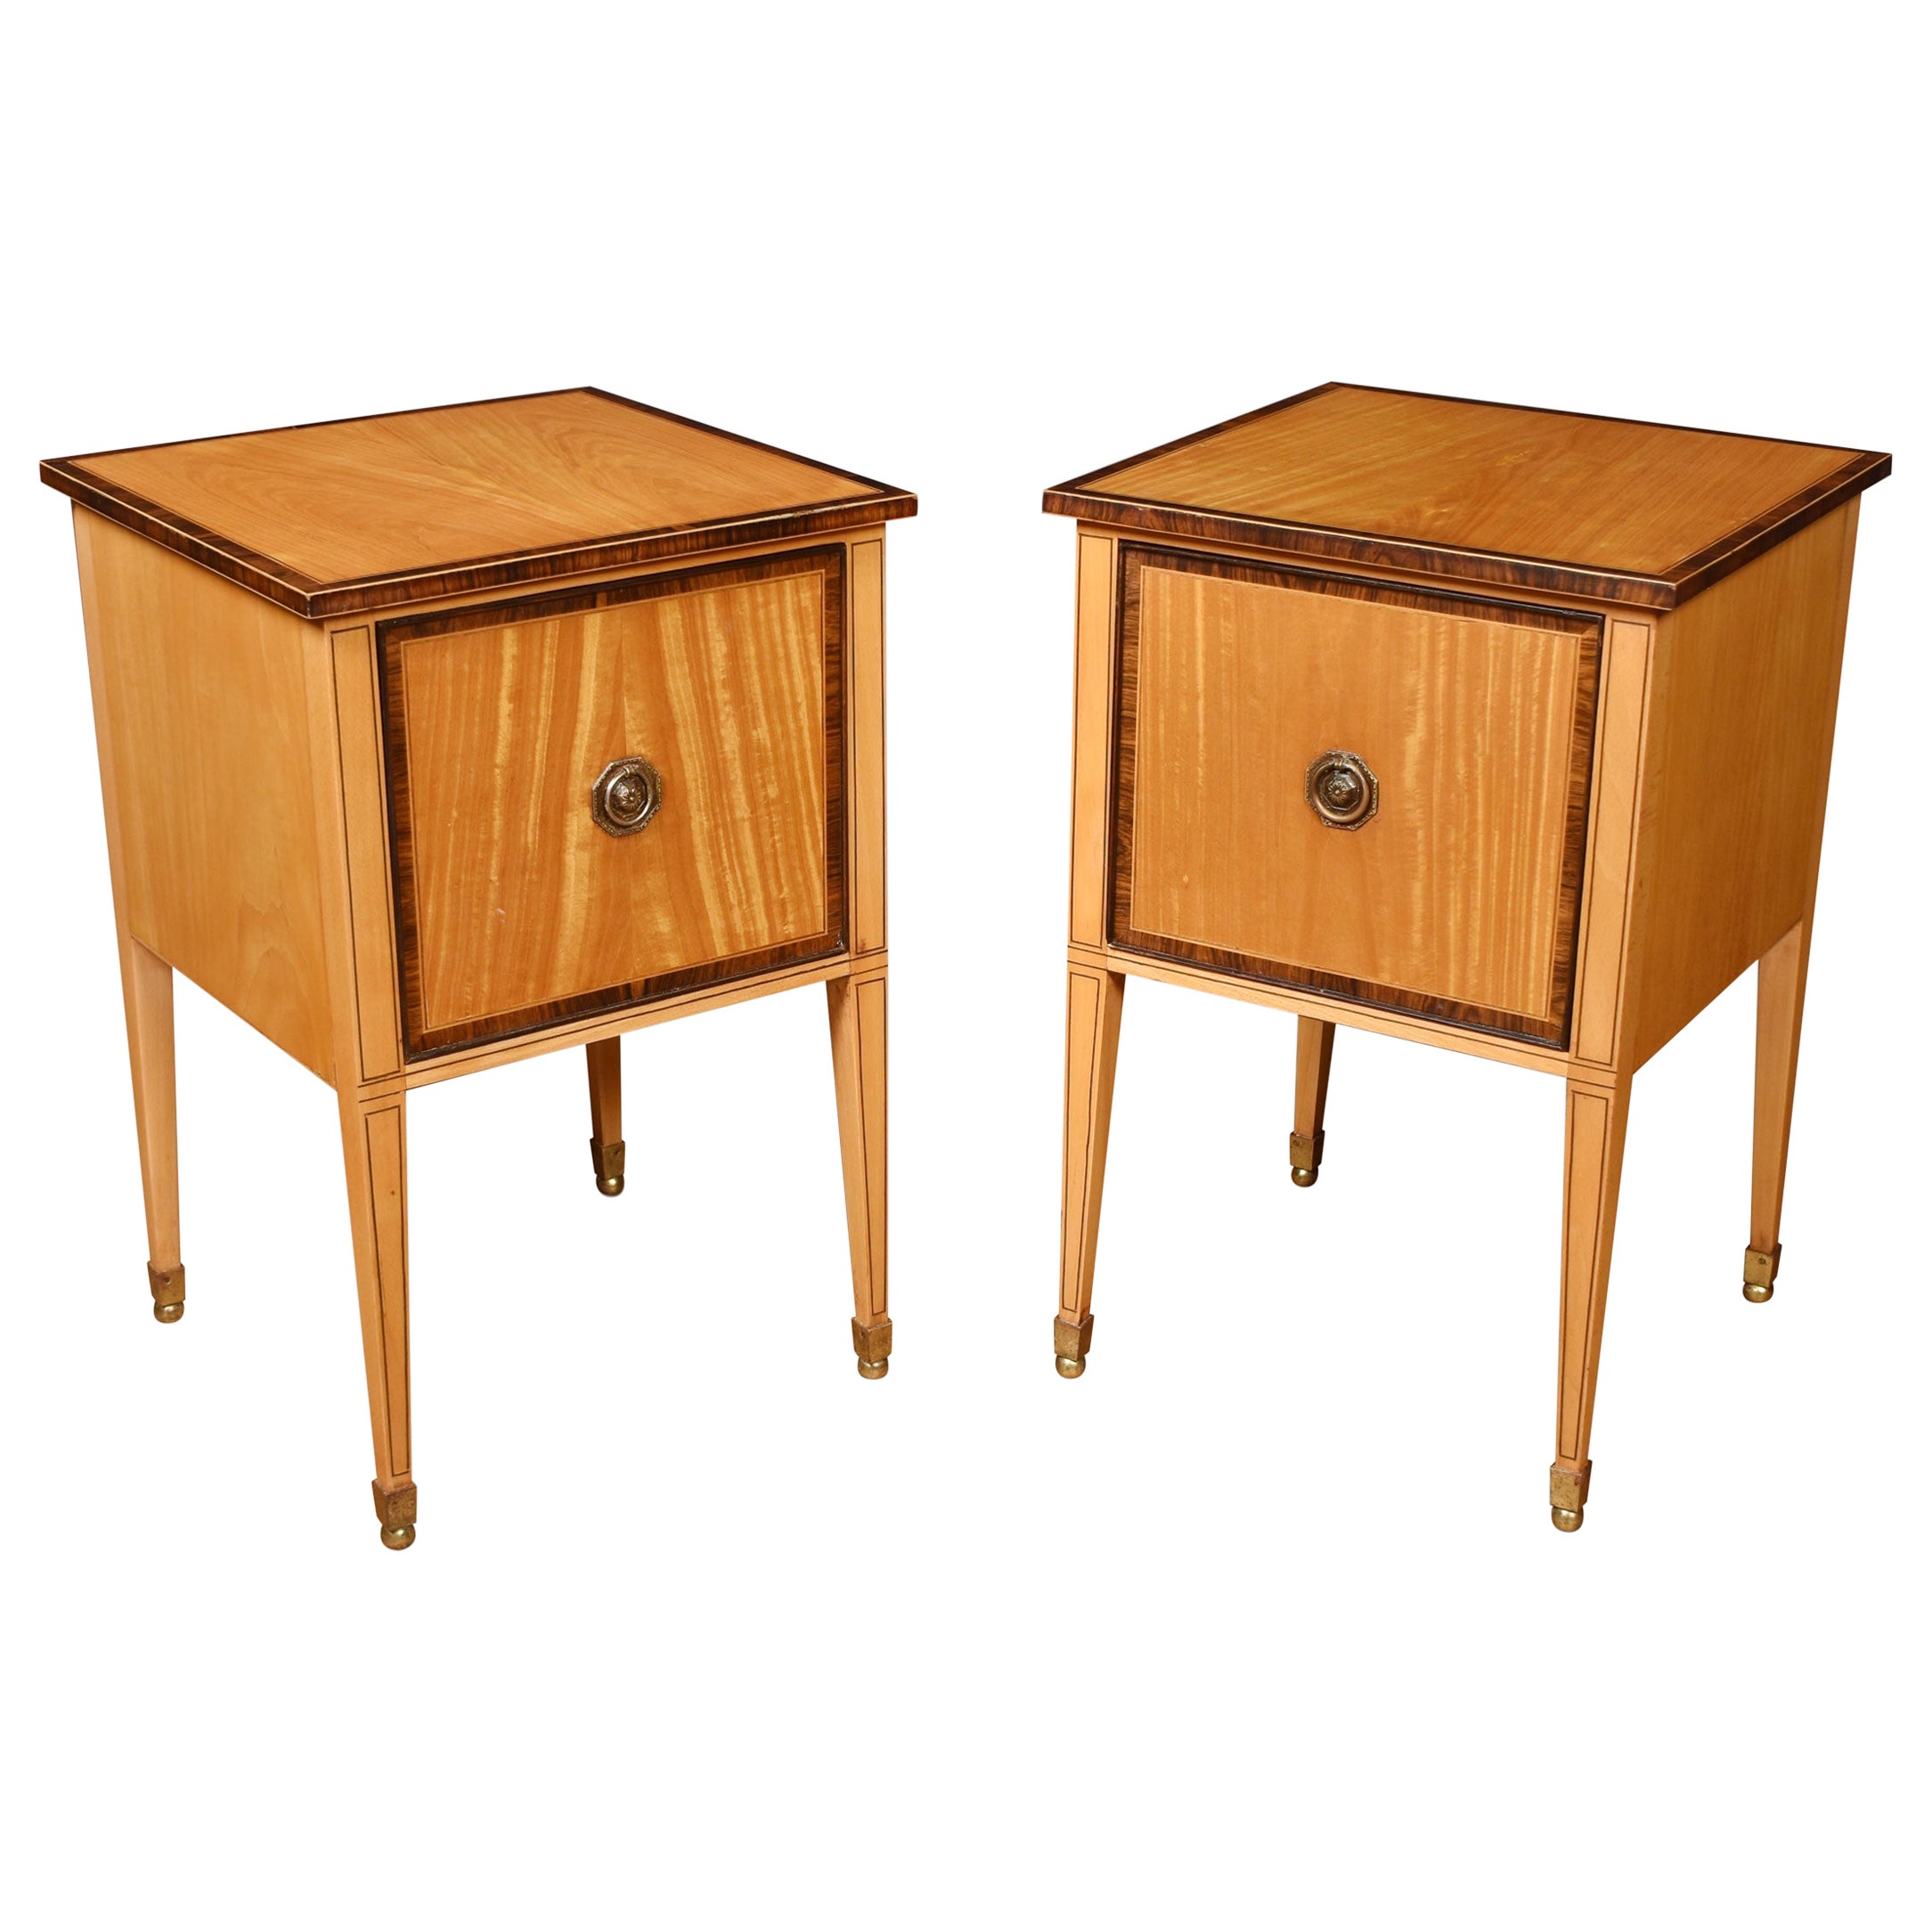 Pair of Satinwood Bedside Cabinets